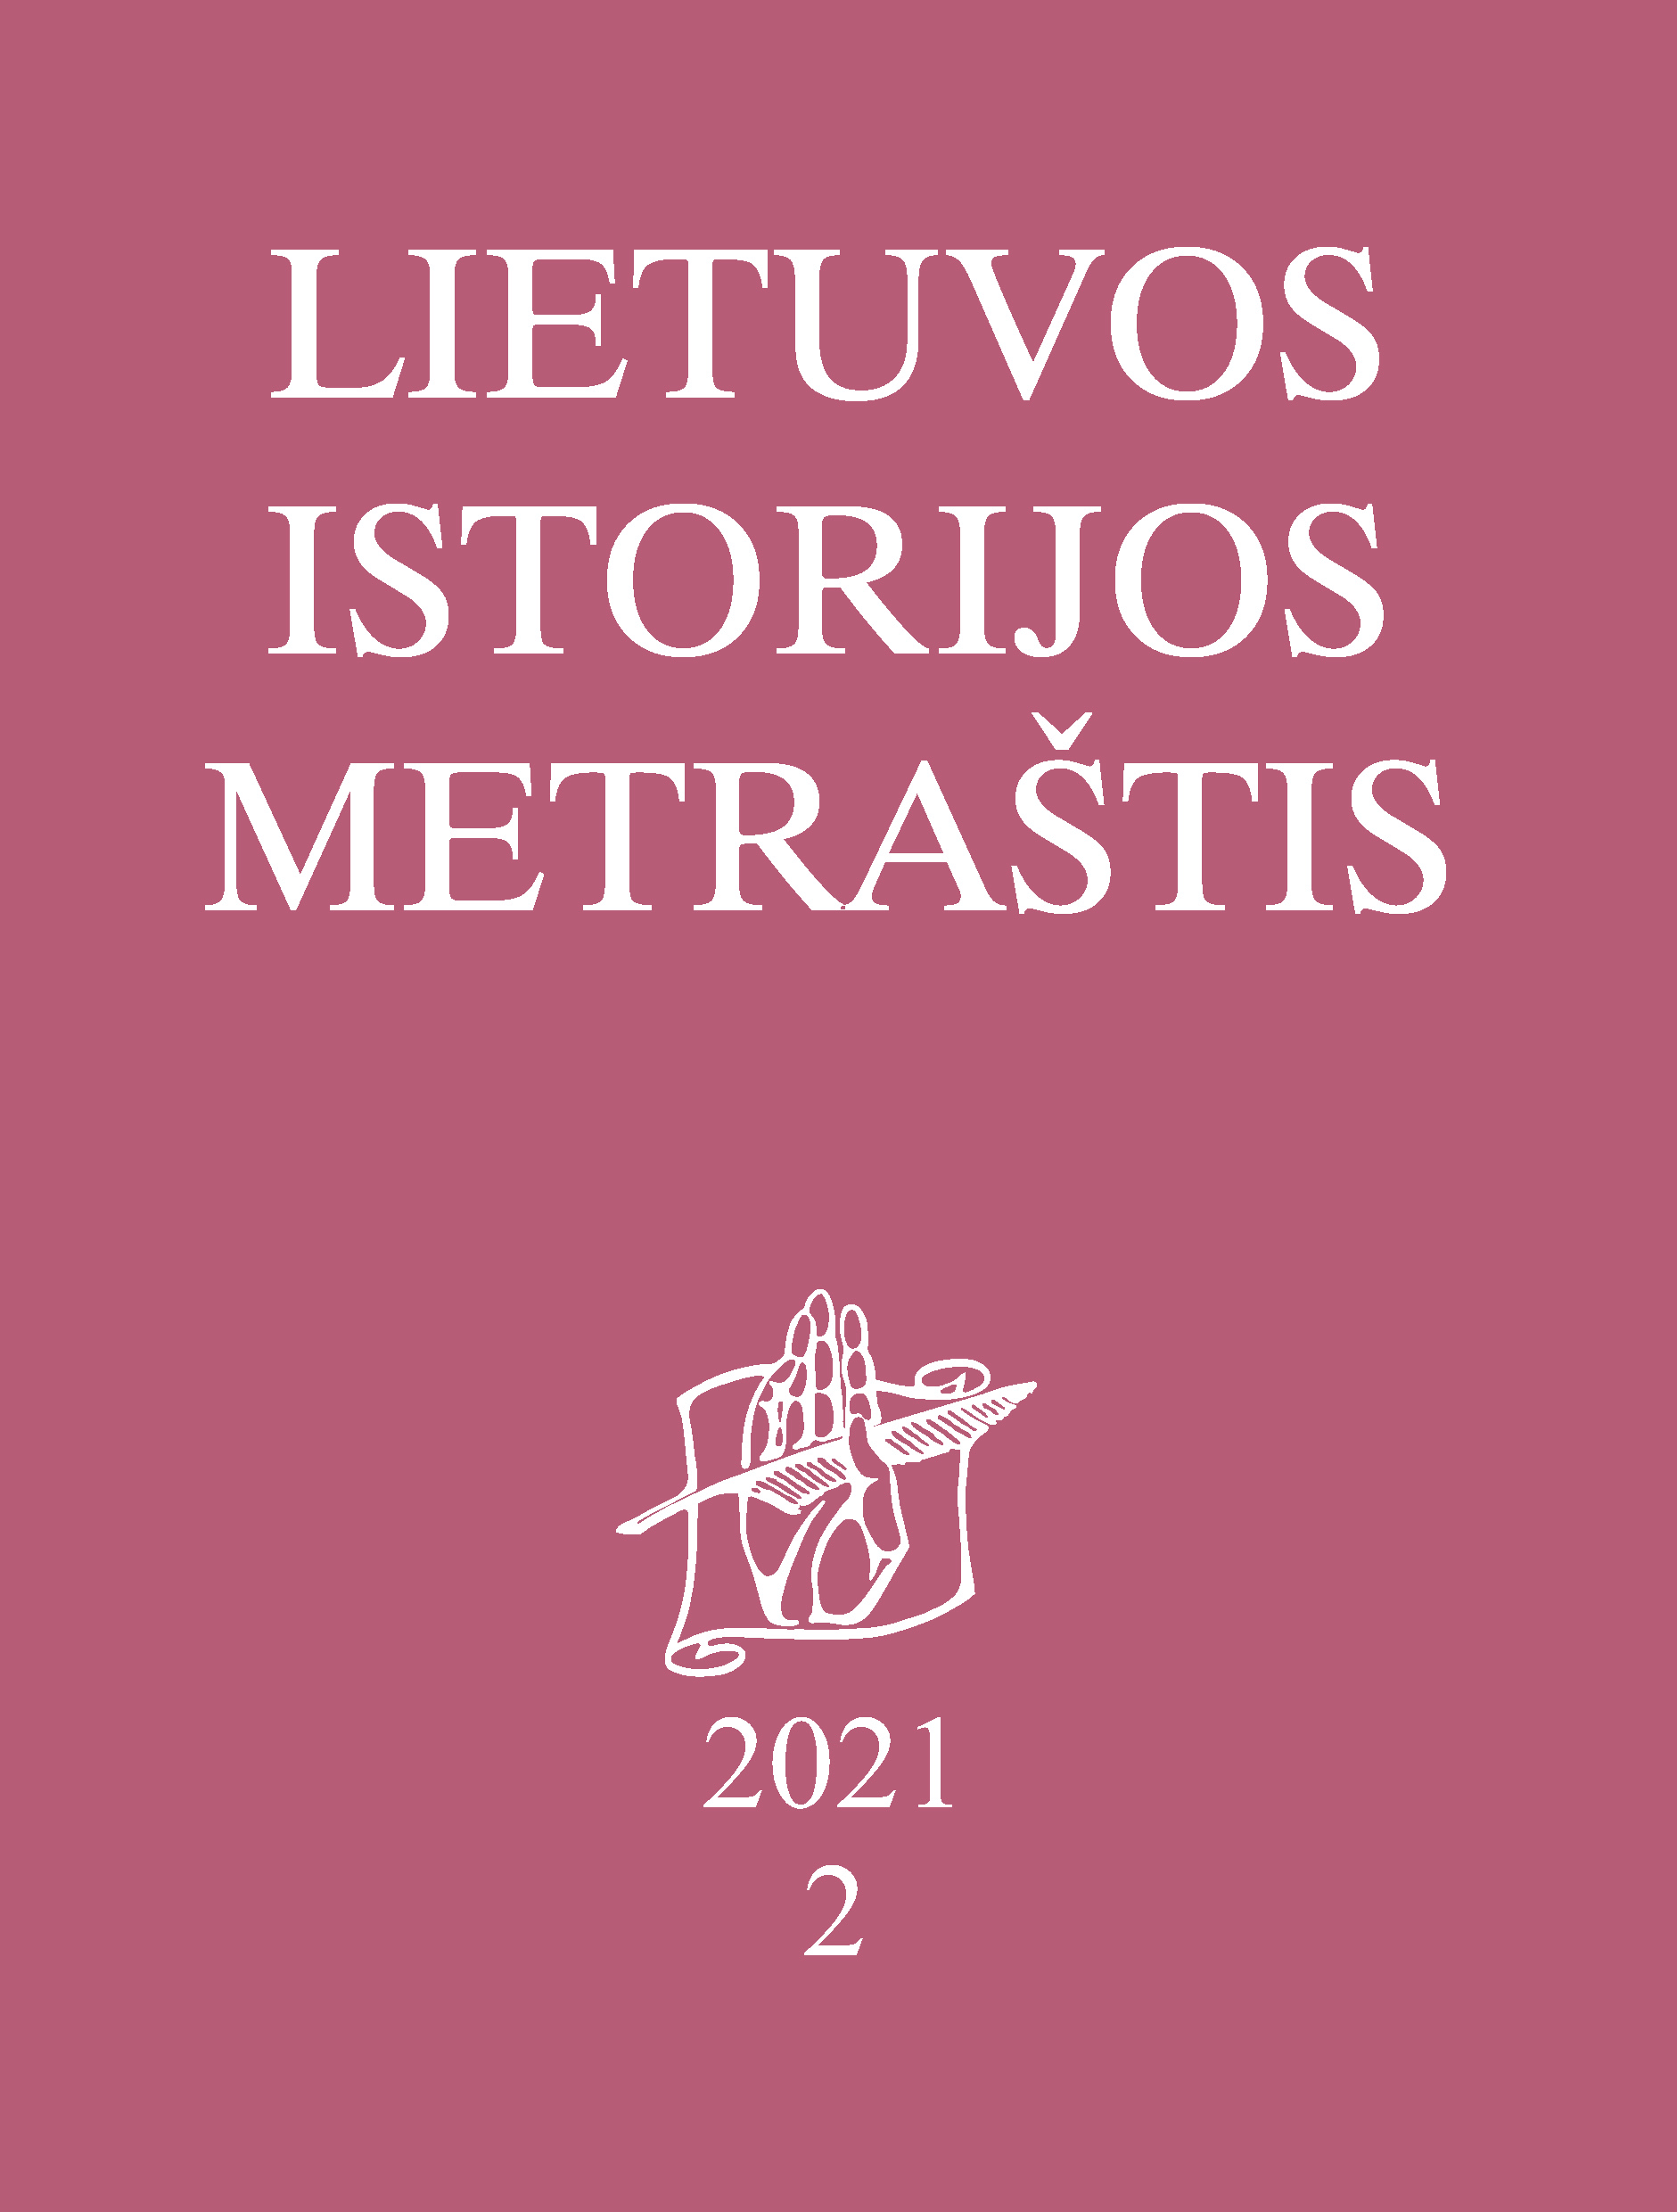 Lietuvos istorijos metraštis / The Year-Book of Lithuanian History Cover